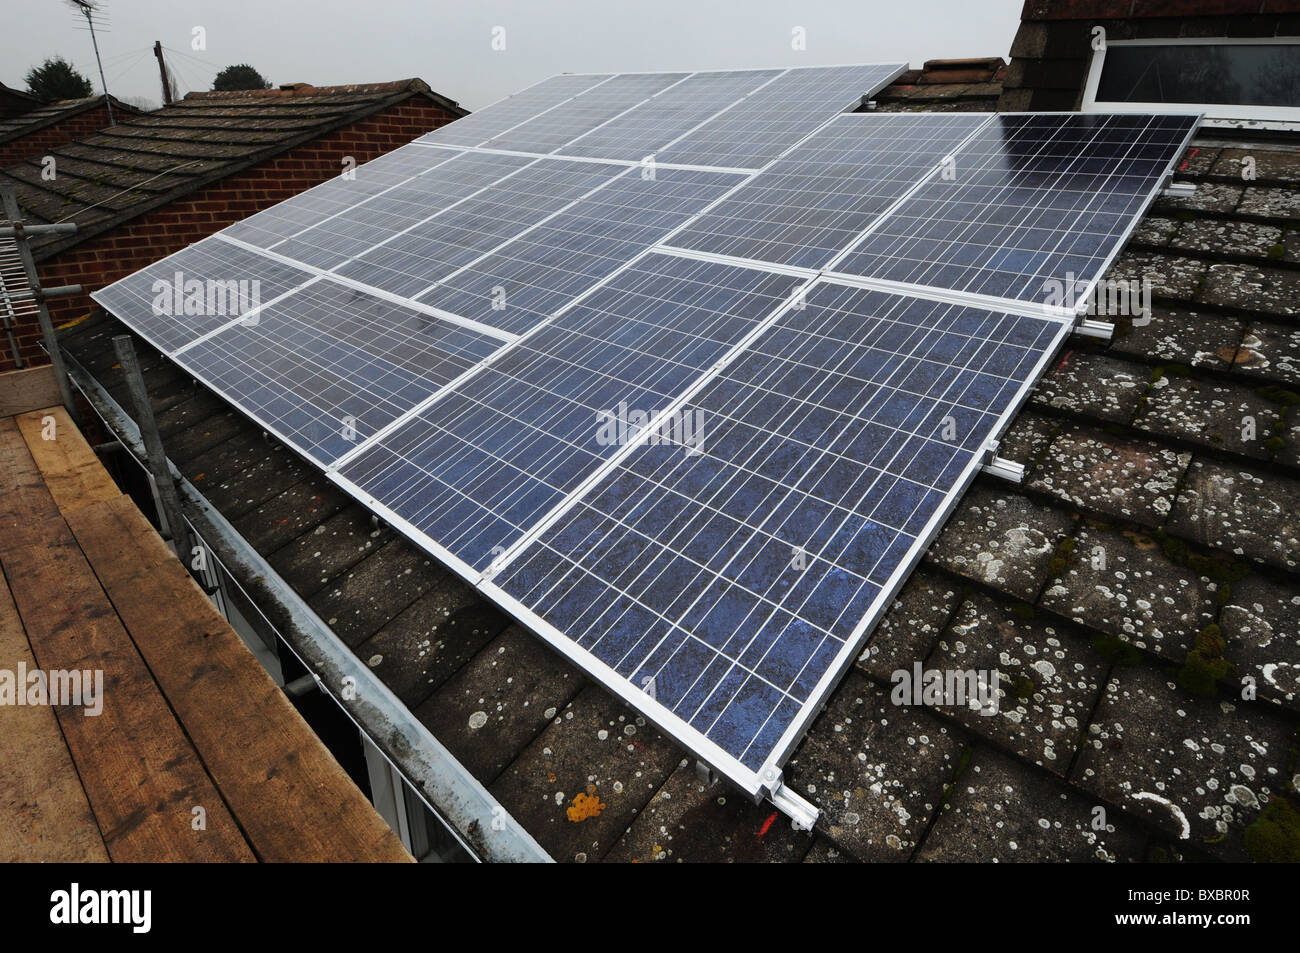 Solar panel installation showing the roof panels, inverter and internal equipment. Stock Photo